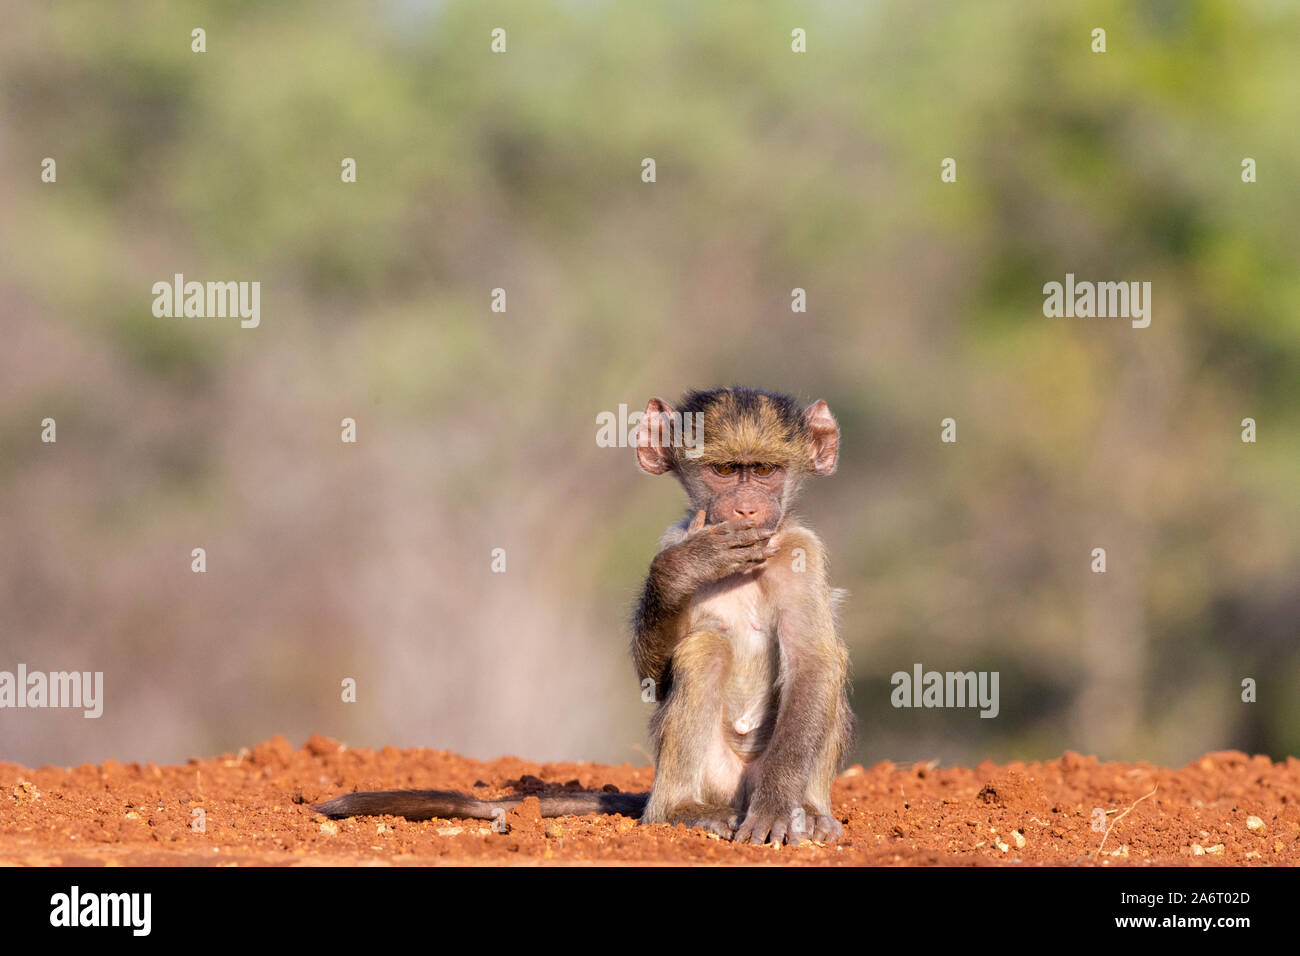 Baby Chacma Baboon (Papio ursinus) sitting with one hand in front of mouth, Karongwe Game Reserve, Limpopo, South Africa Stock Photo